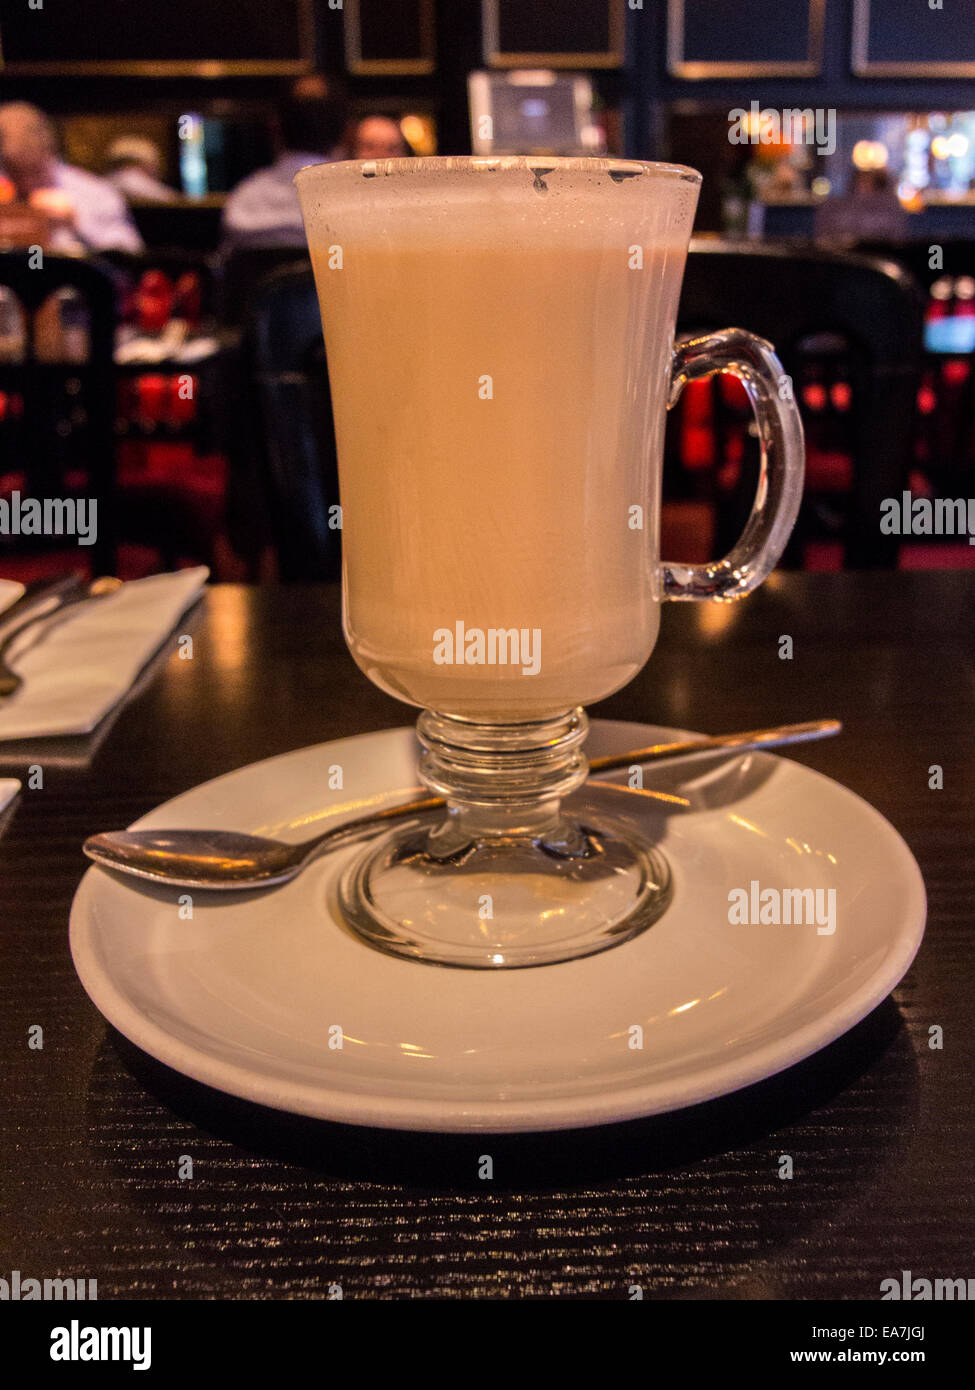 Tall Latte, close up image depicting hot latte coffee in a glass tumbler. Stock Photo